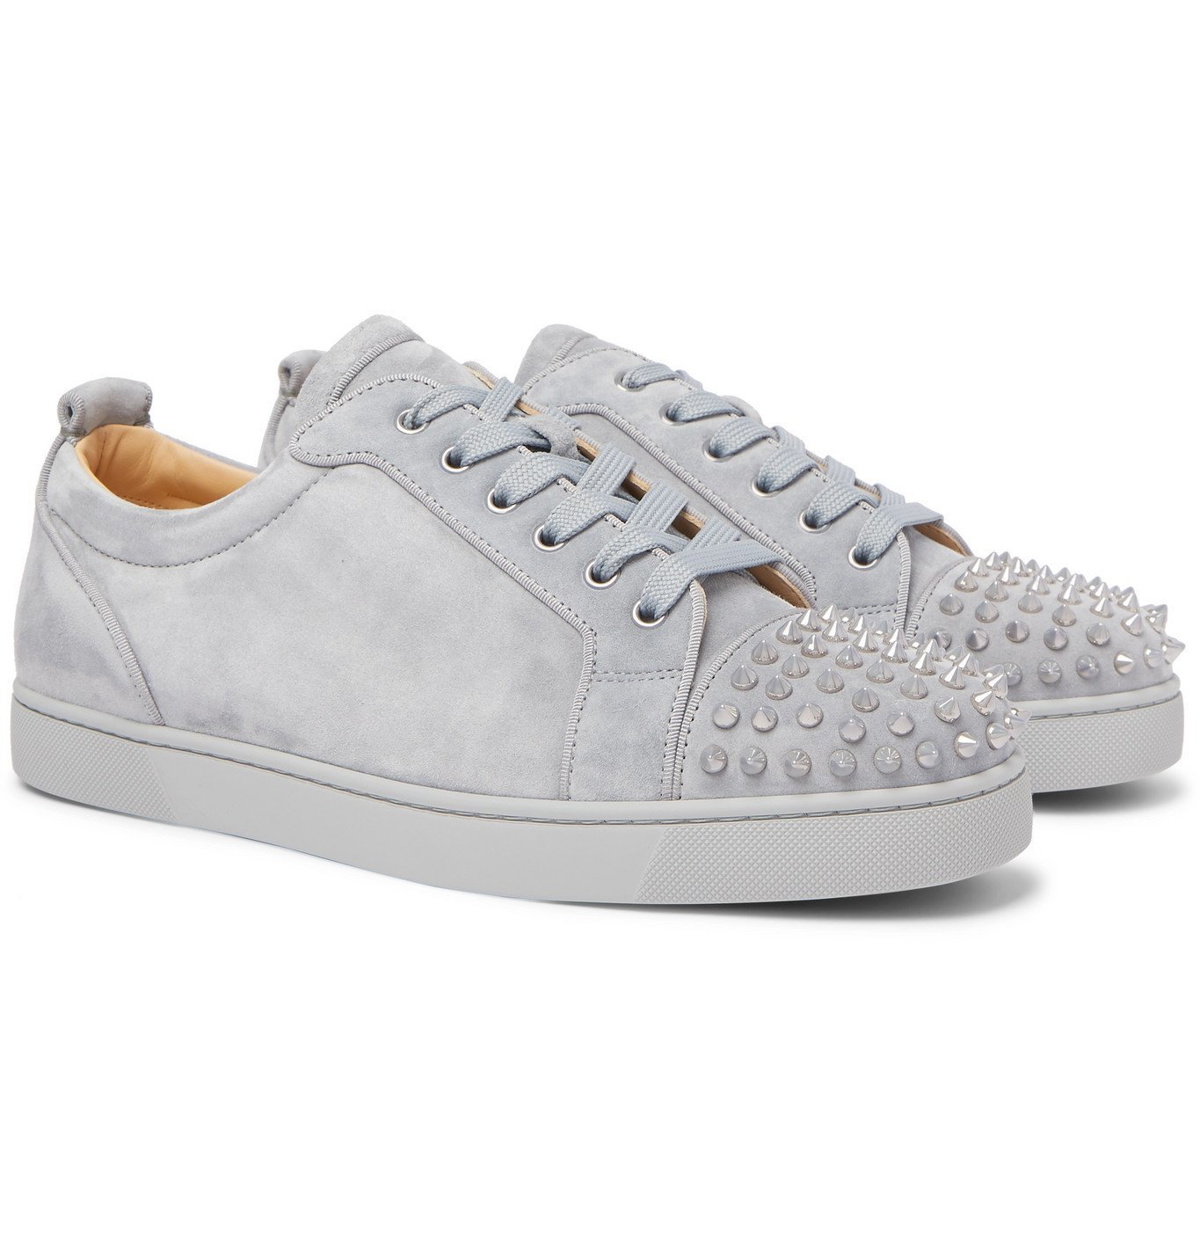 CHRISTIAN LOUBOUTIN - Louis Junior Spikes suede trainers